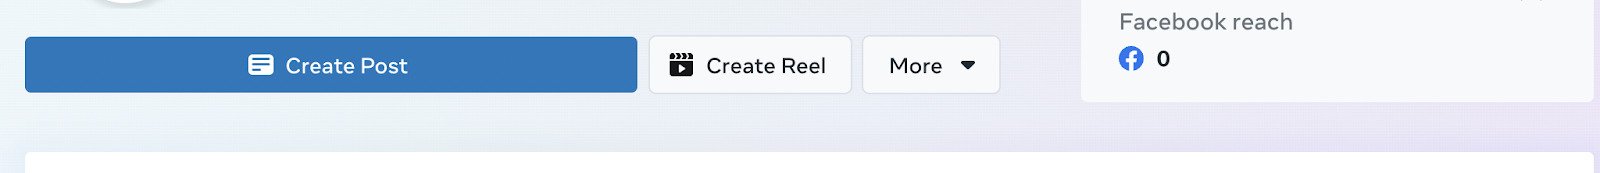 How to Post Reels on Facebook - create post